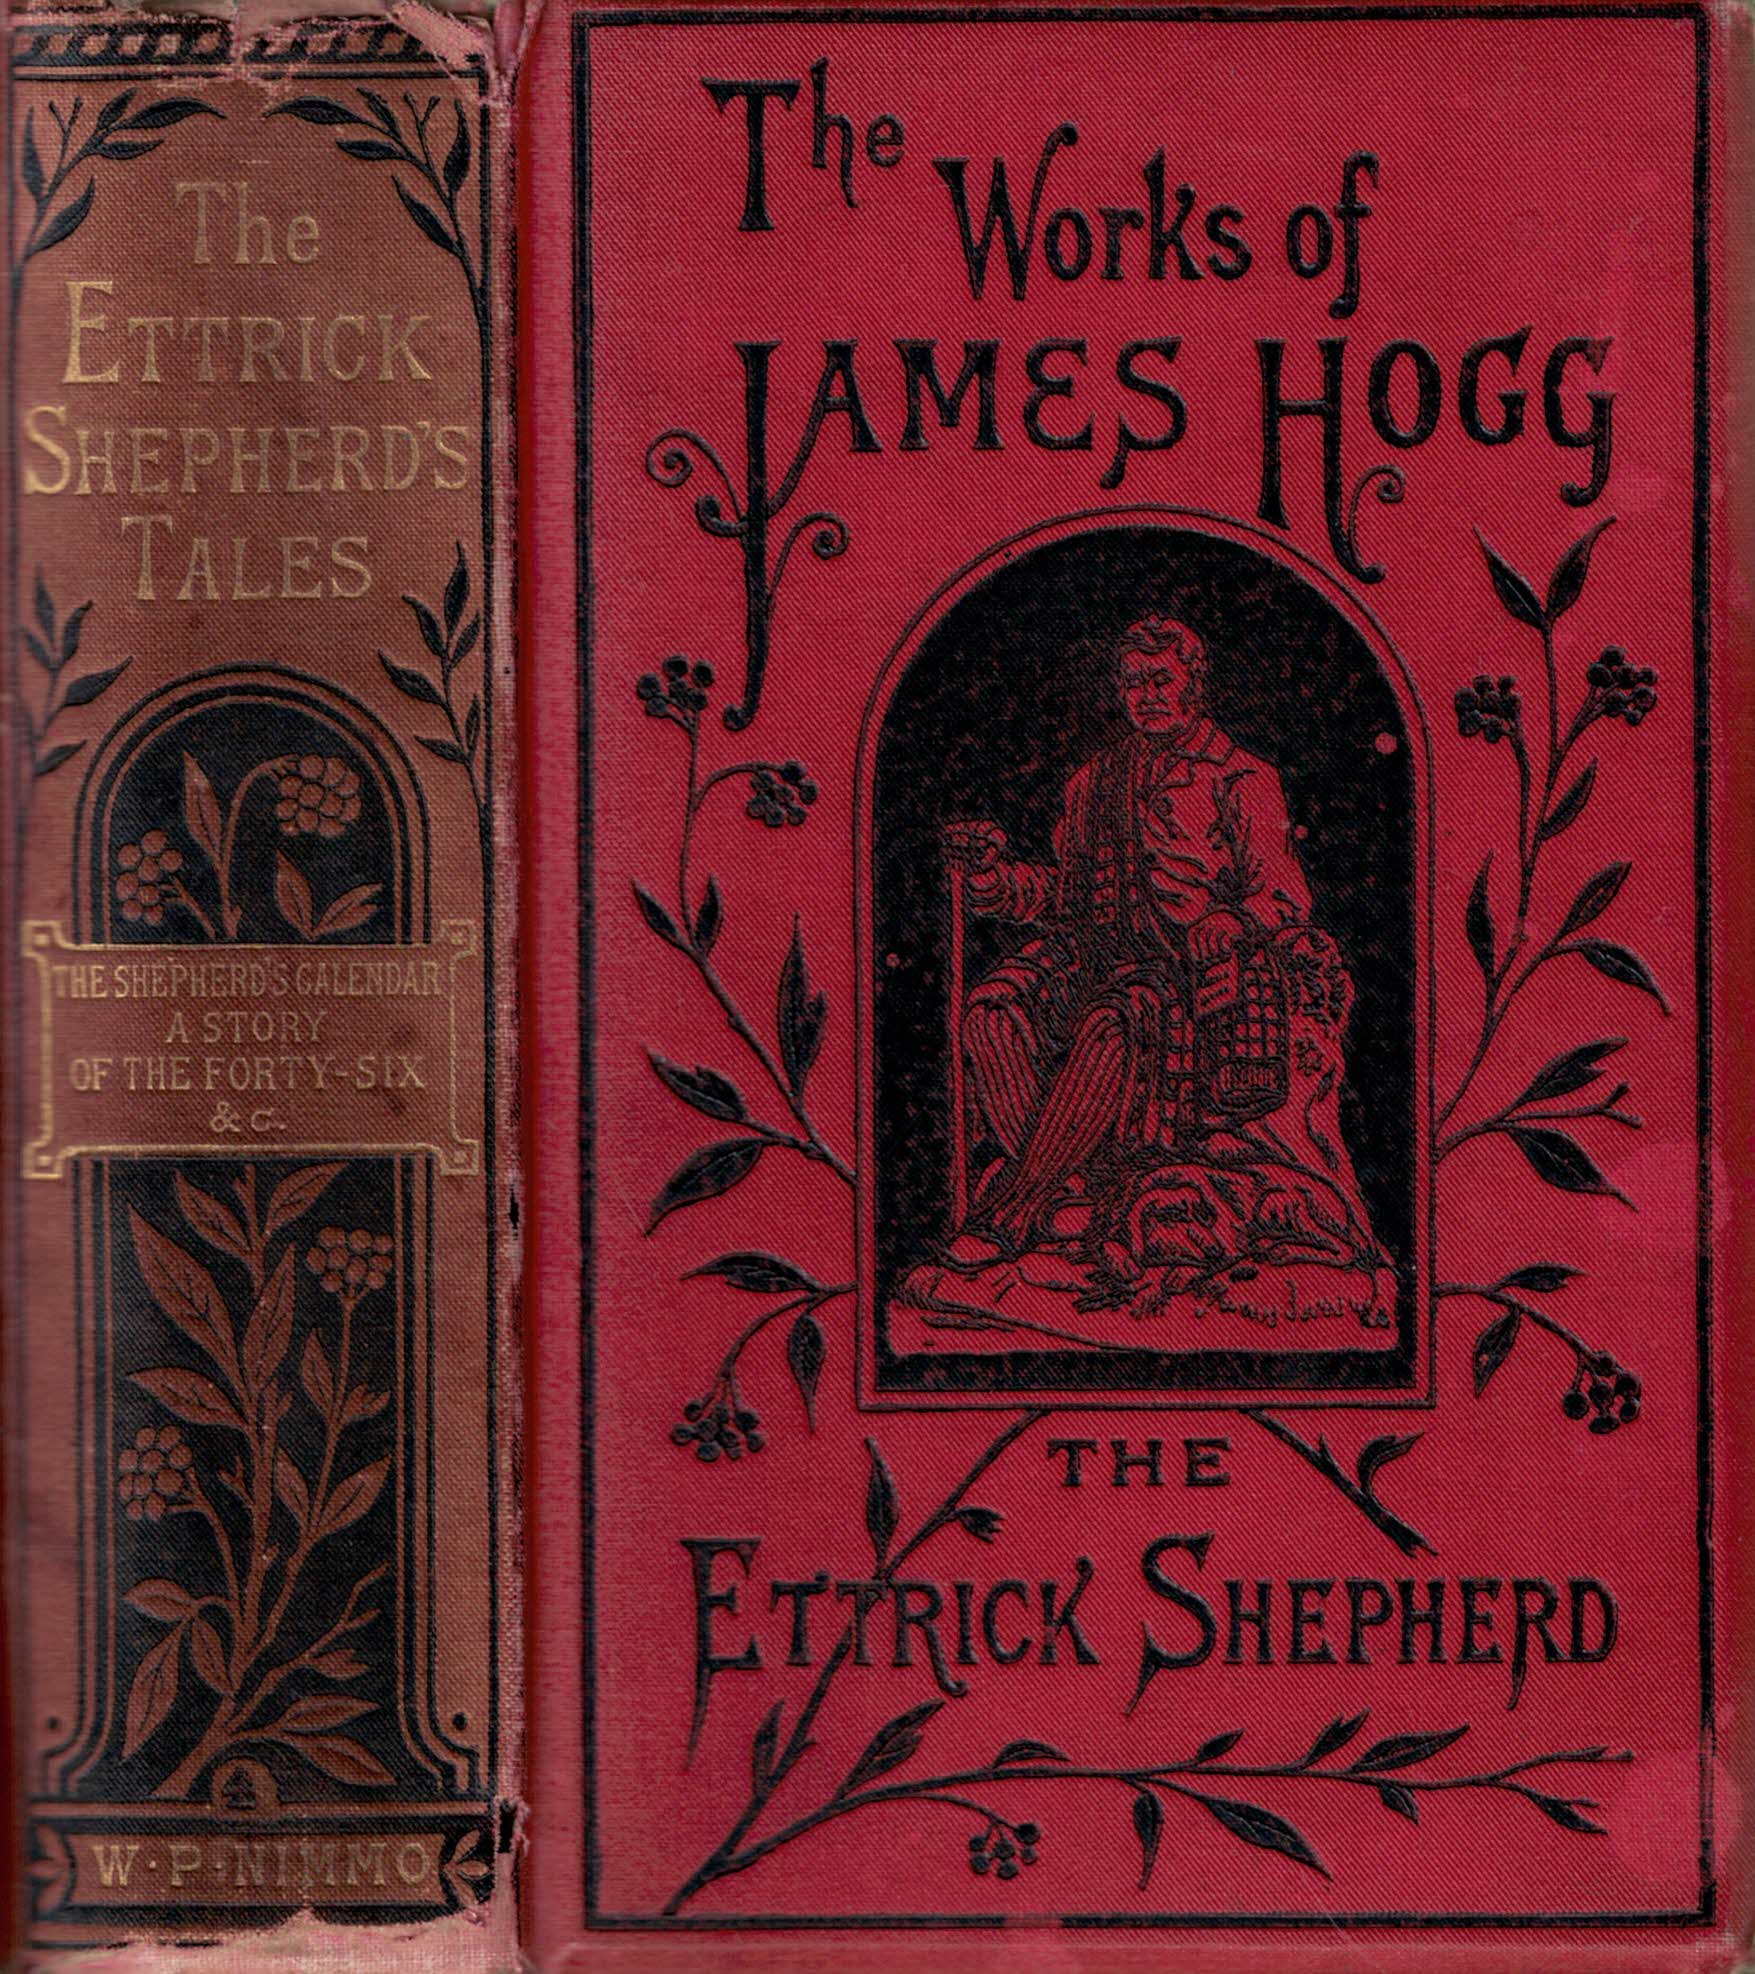 HOGG, JAMES [THE ETTRICK SHEPHERD] - The Shepherd's Calendar + a Story of the Forty-Six, Etc. Tales and Sketches by the Ettrick Shepherd